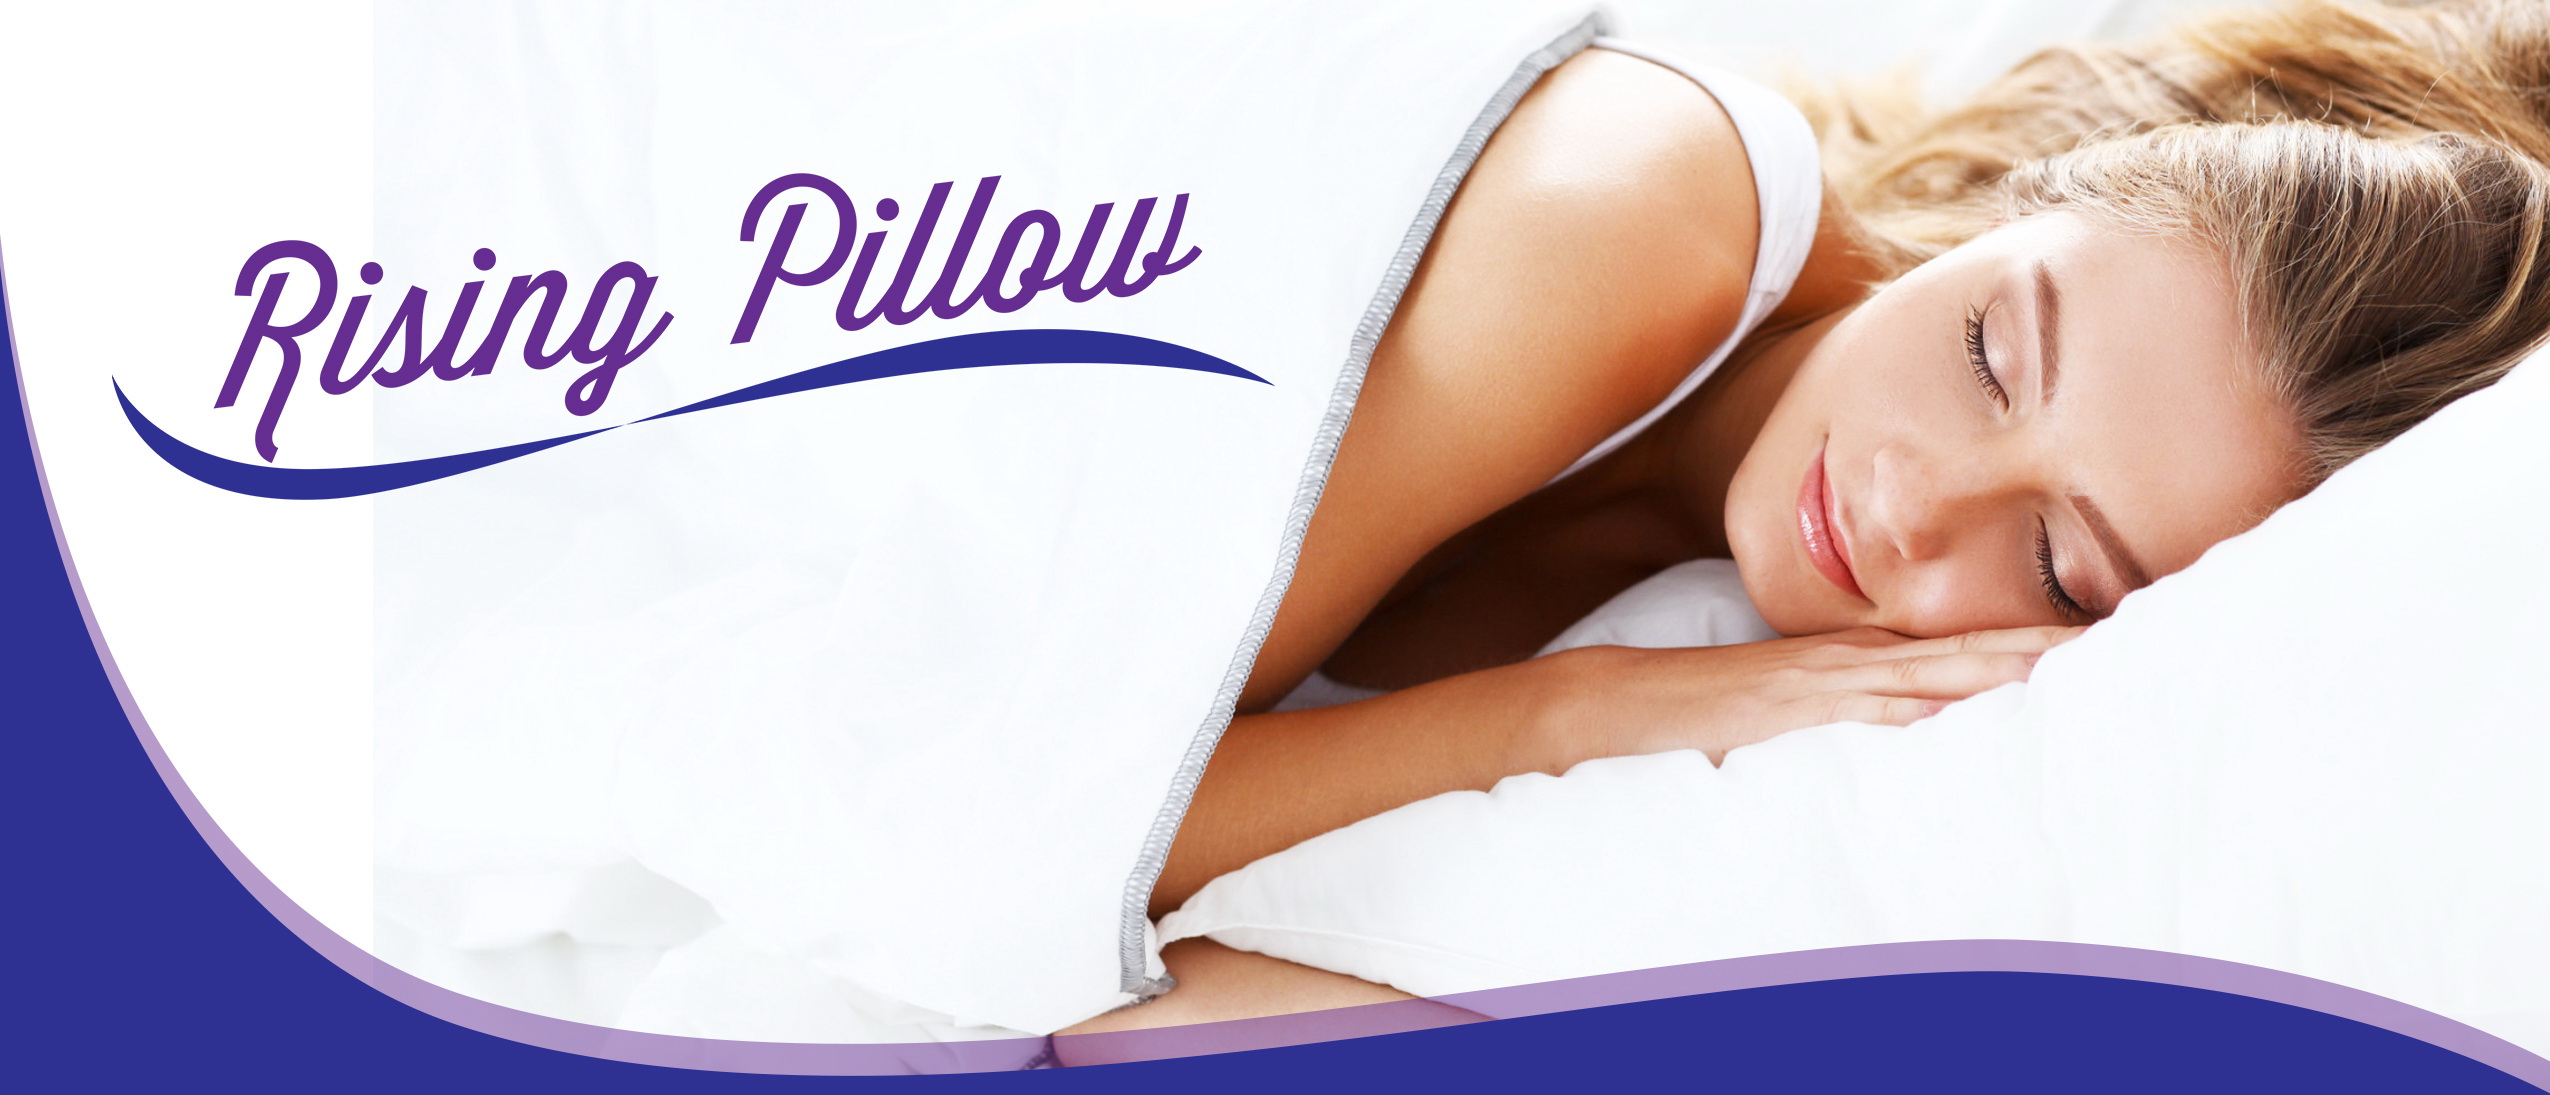 World Patent Marketing Success Group Introduces The Rising Pillow A